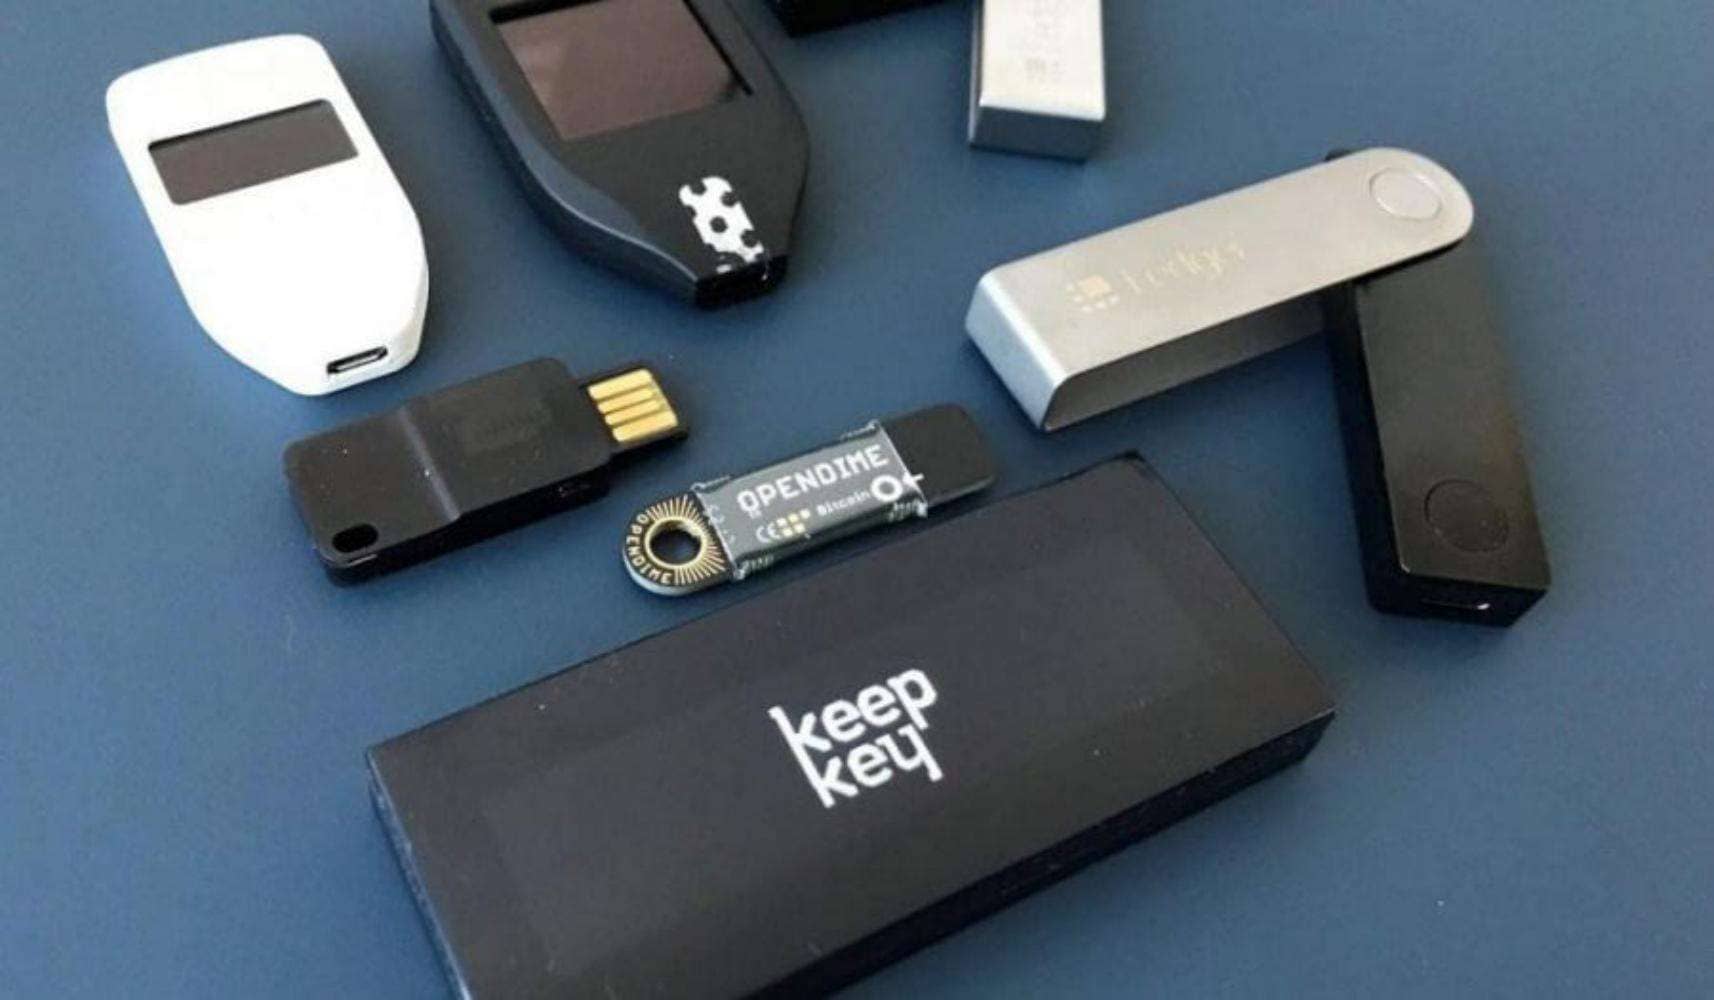 Hardware Cryptocurrency Wallet: Functionality and Importance